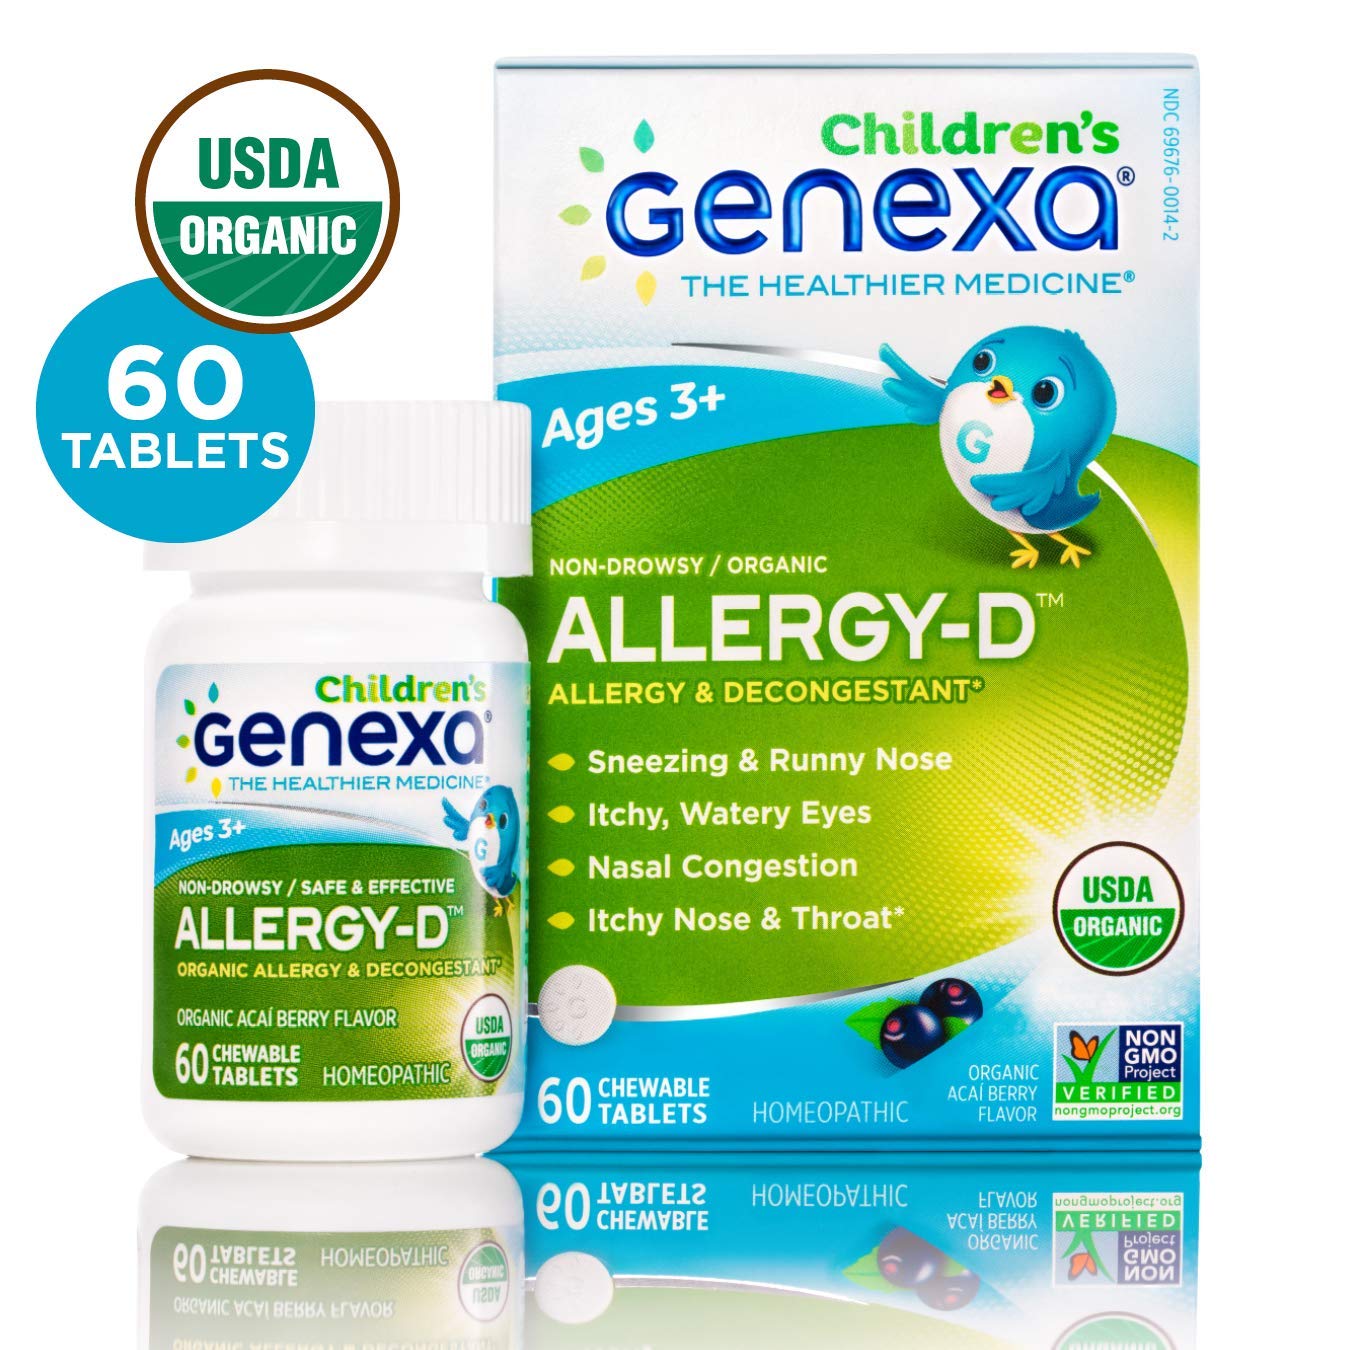 Genexa Allergy-D for Children – 60 Tablets | Certified Organic & Non-GMO, Physician Formulated, Homeopathic